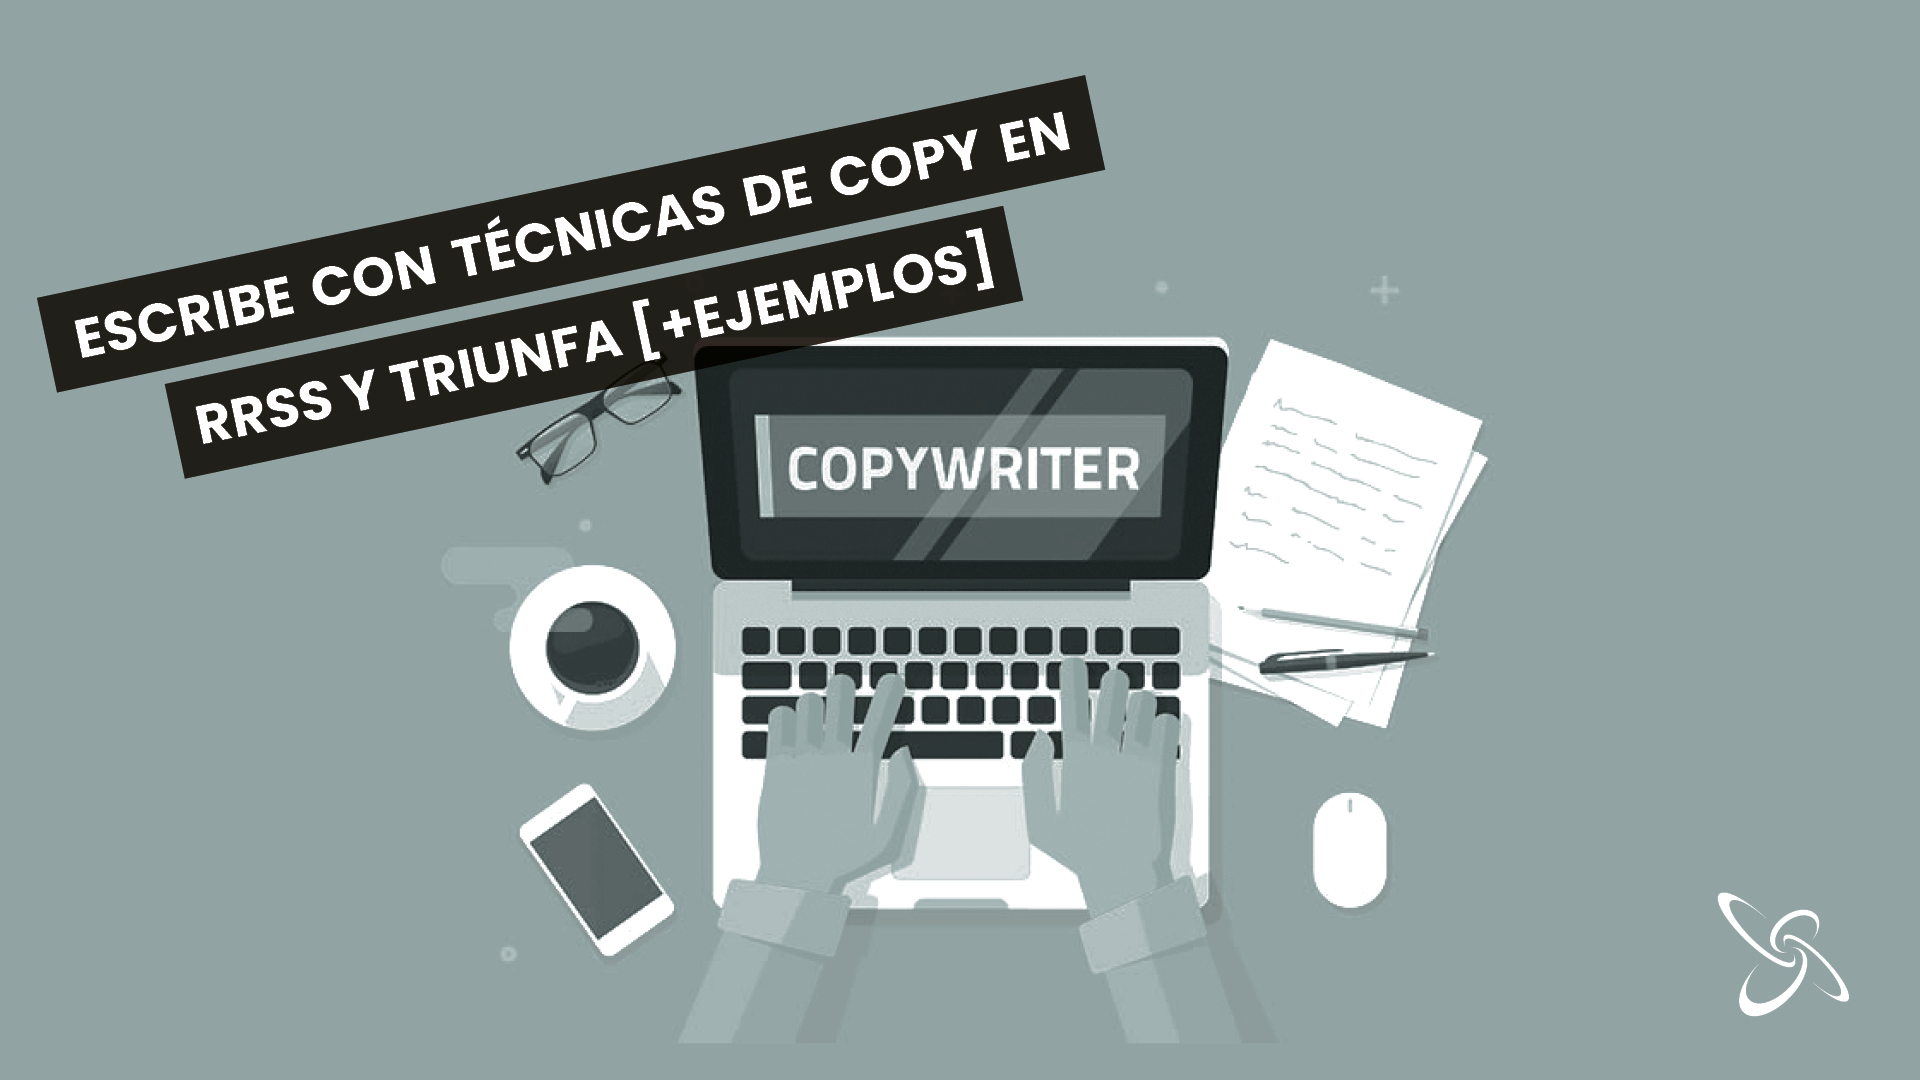 Write with Copywriting techniques on social networks and succeed [+EXAMPLES]